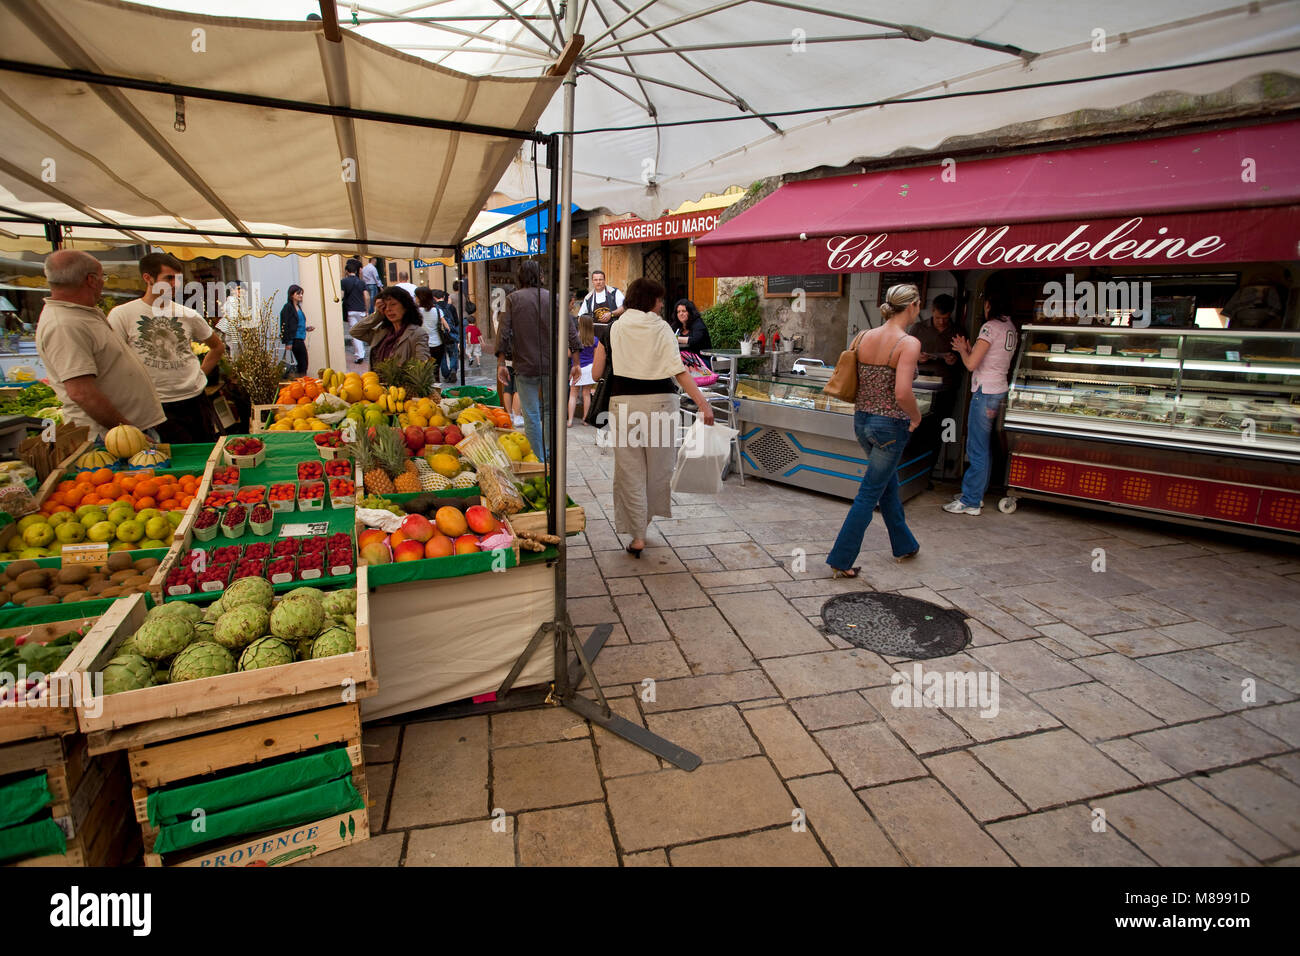 Small market at Place aux Herbes, old town of Saint-Tropez, french riviera, South France, Cote d'Azur, France, Europe Stock Photo